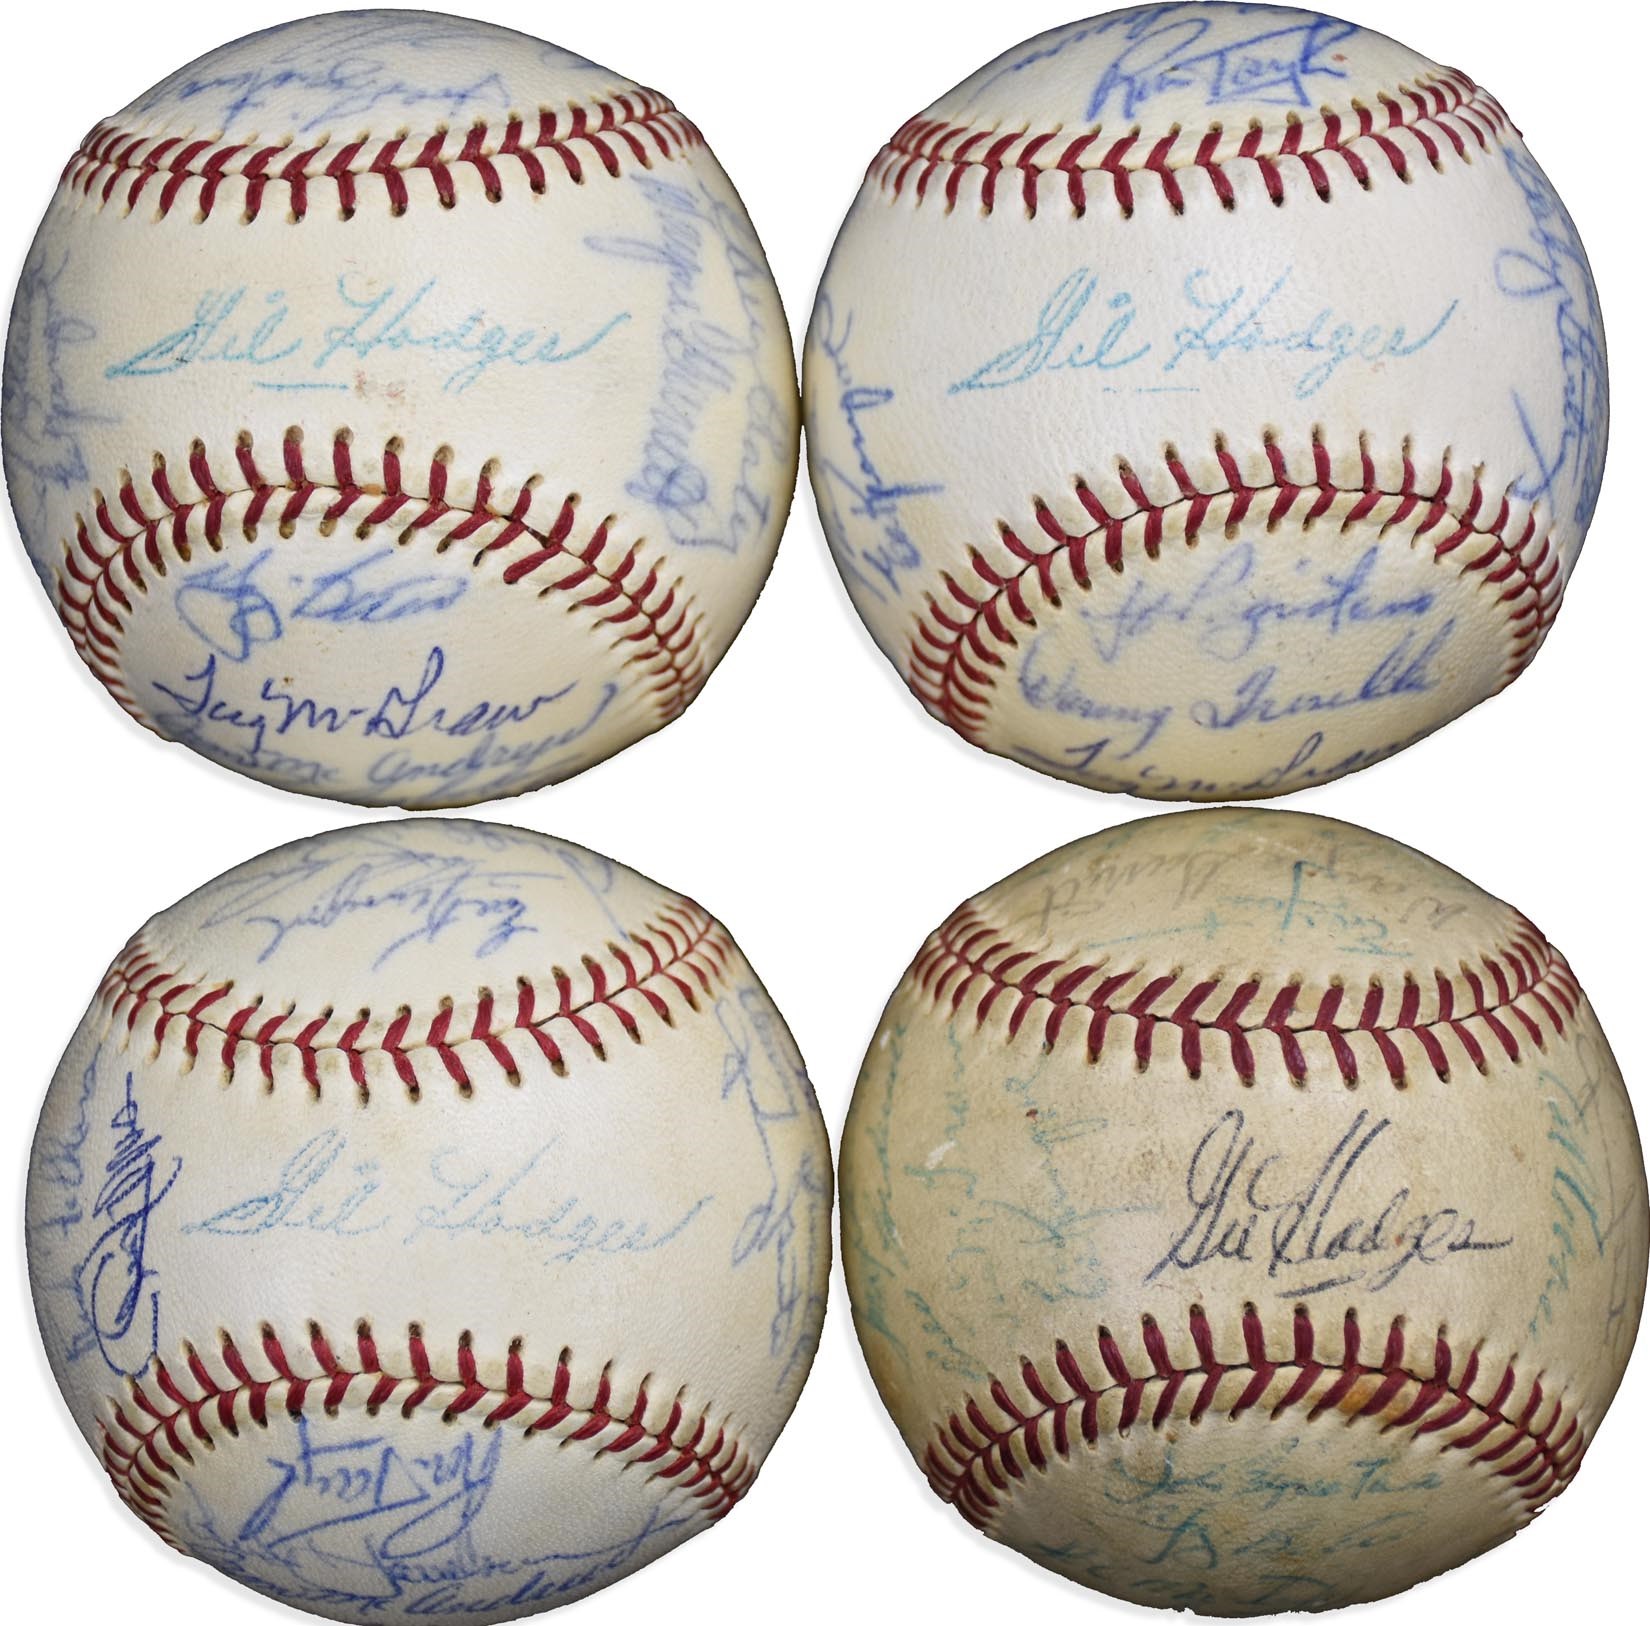 - 1969 World Champion & 1970 NY Mets Team-Signed Baseballs - Gifted by Ron Taylor (4)